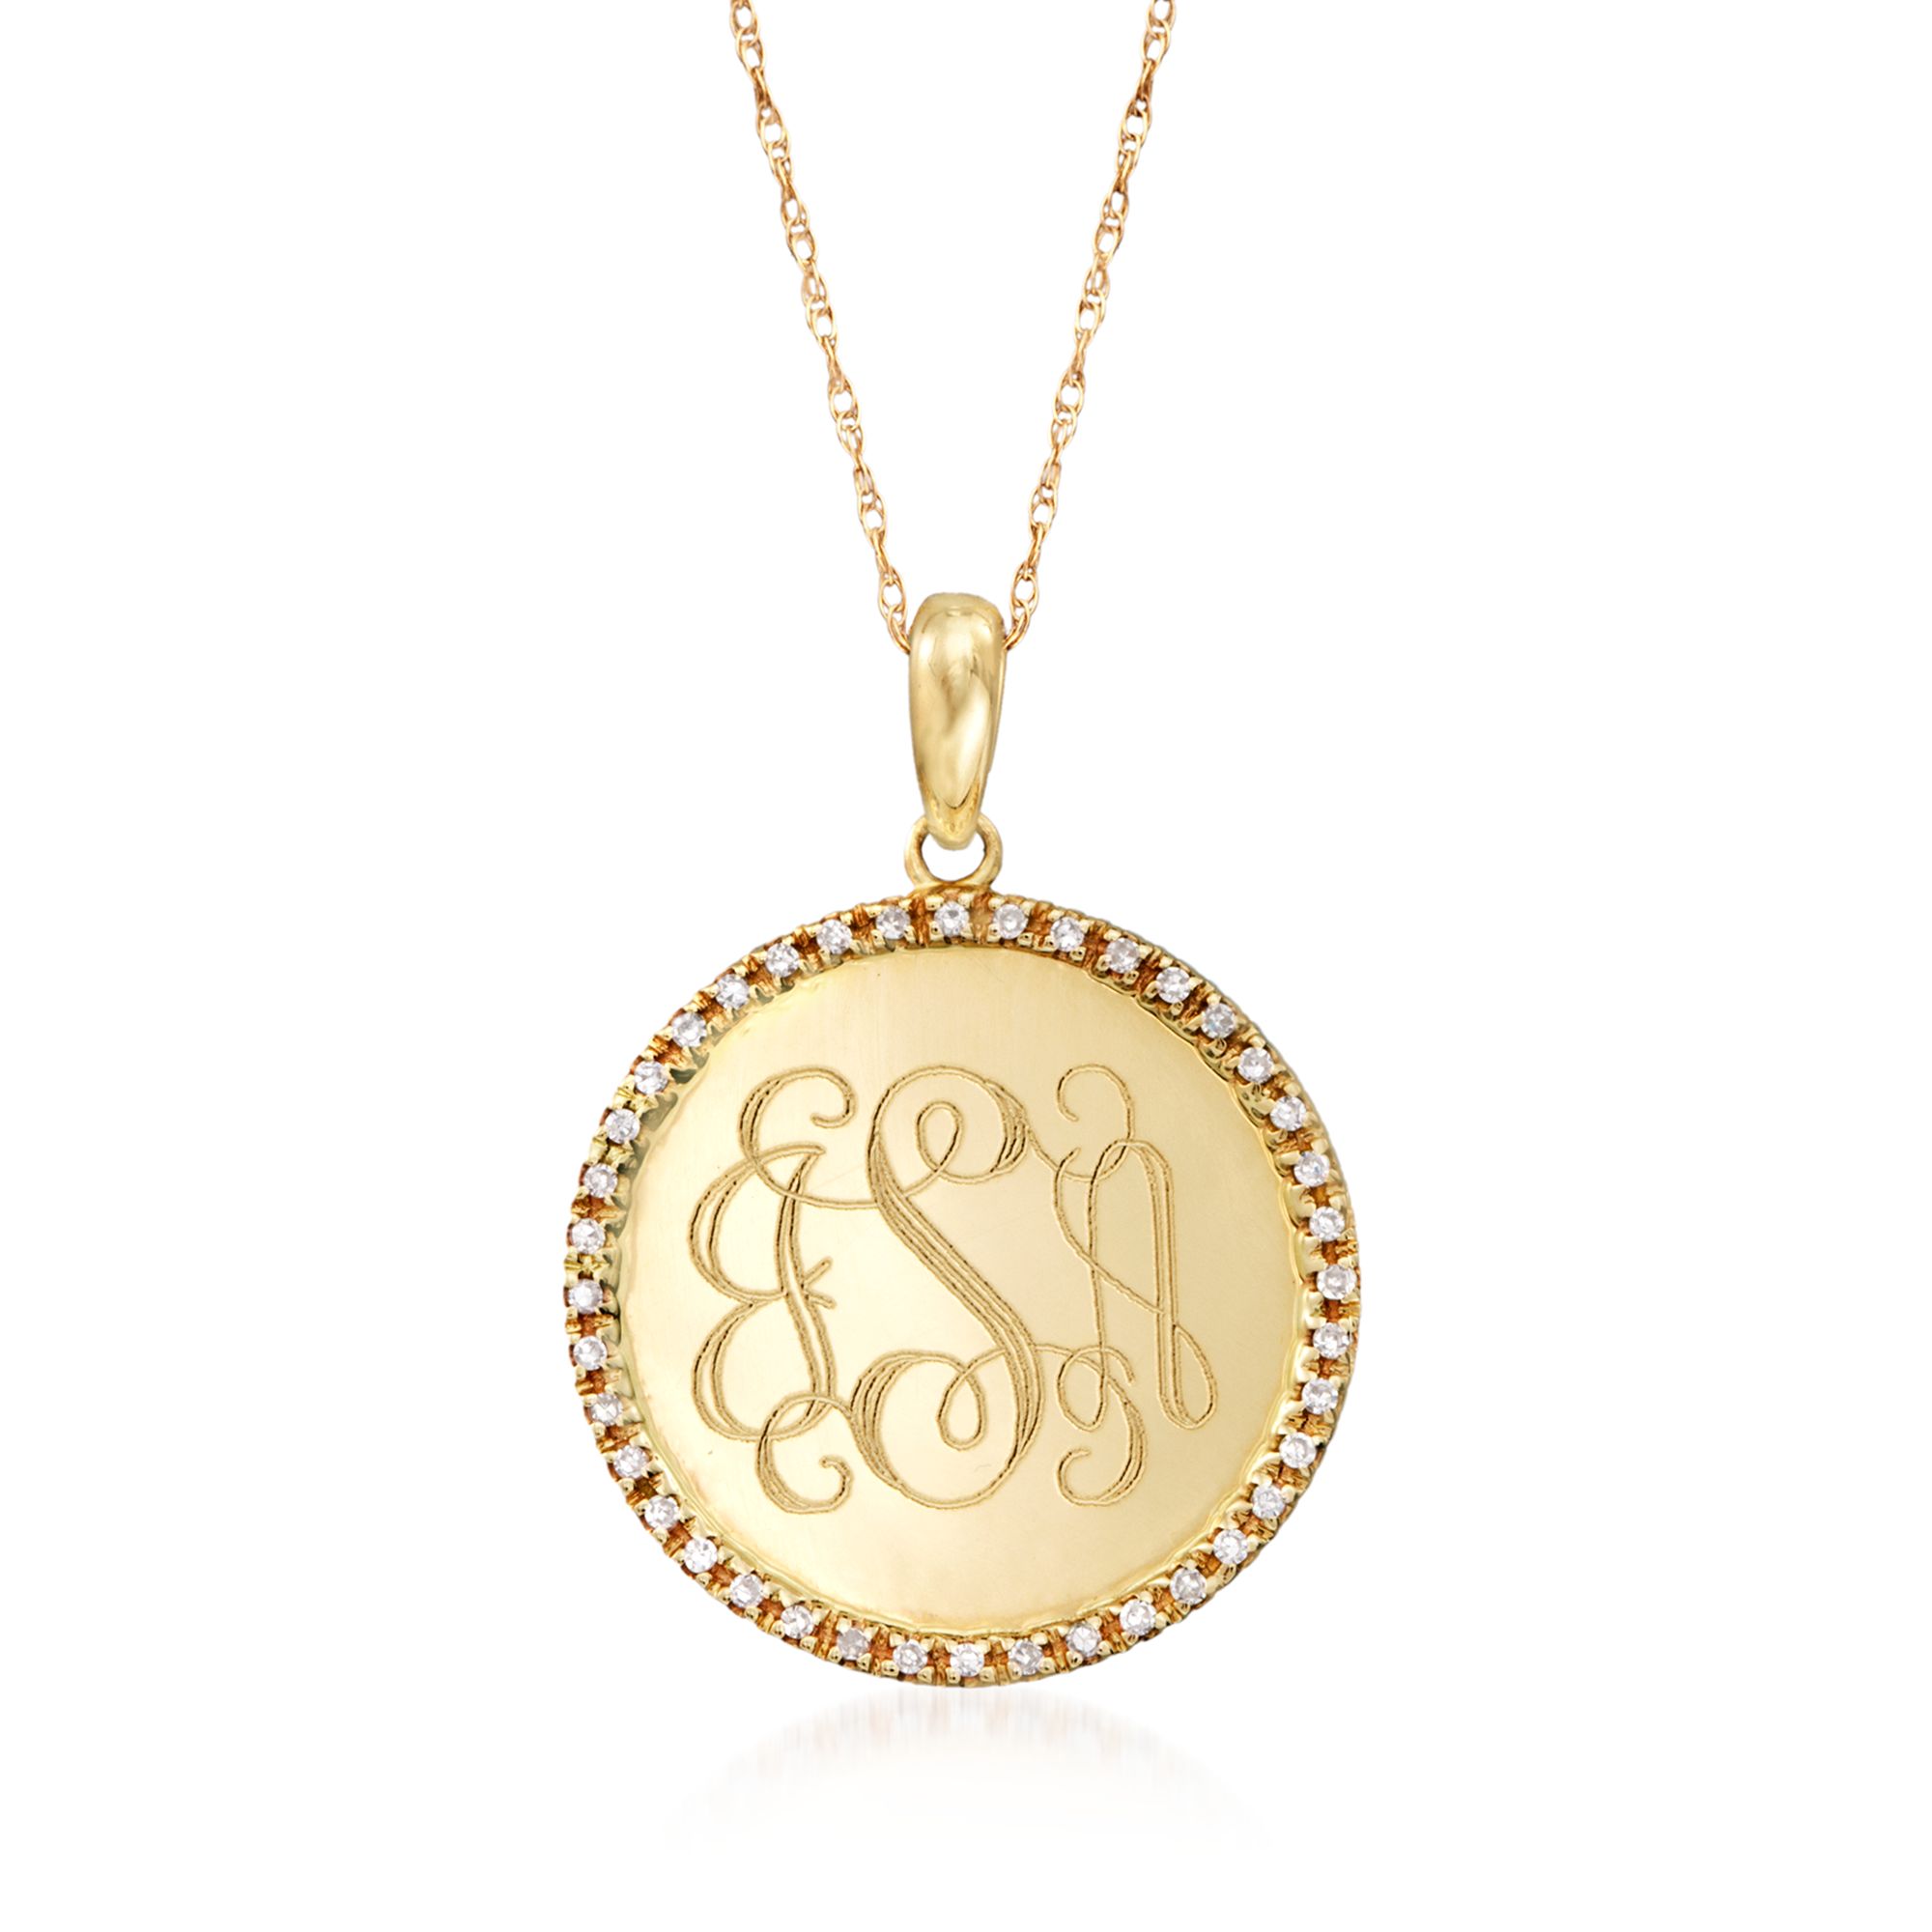 21mm x 30mm Solid 925 Sterling Silver with Gold-Toned Clemson University Large Disc Pendant